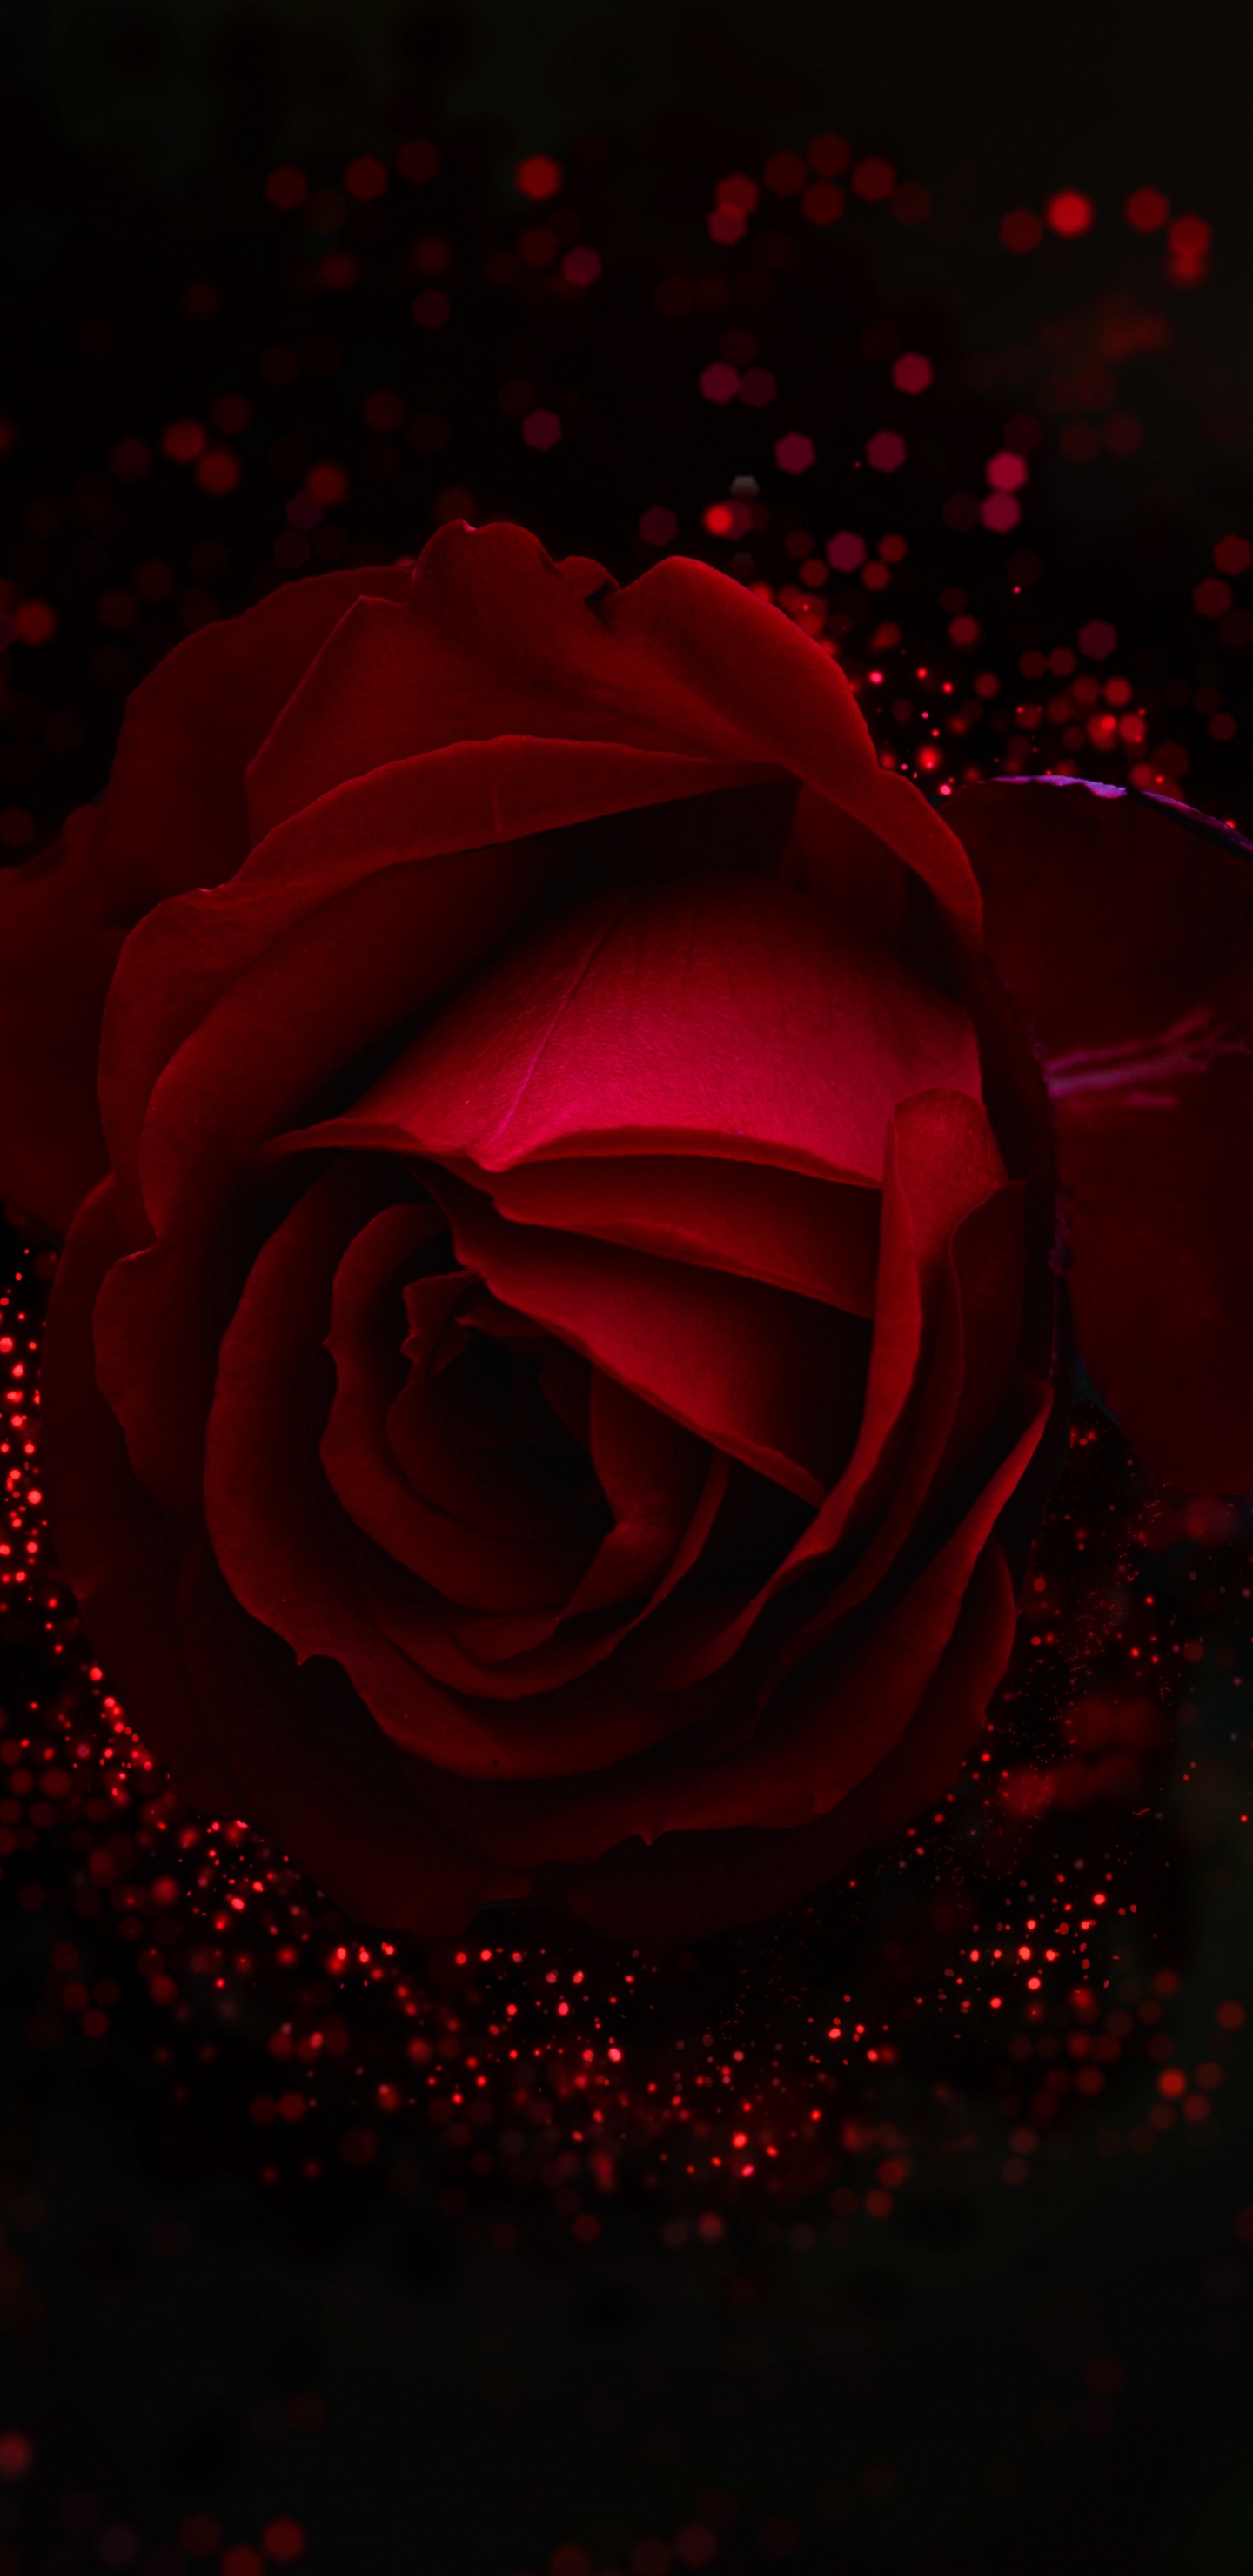 Red Rose With Water Droplets. Wallpaper in 1440x2960 Resolution